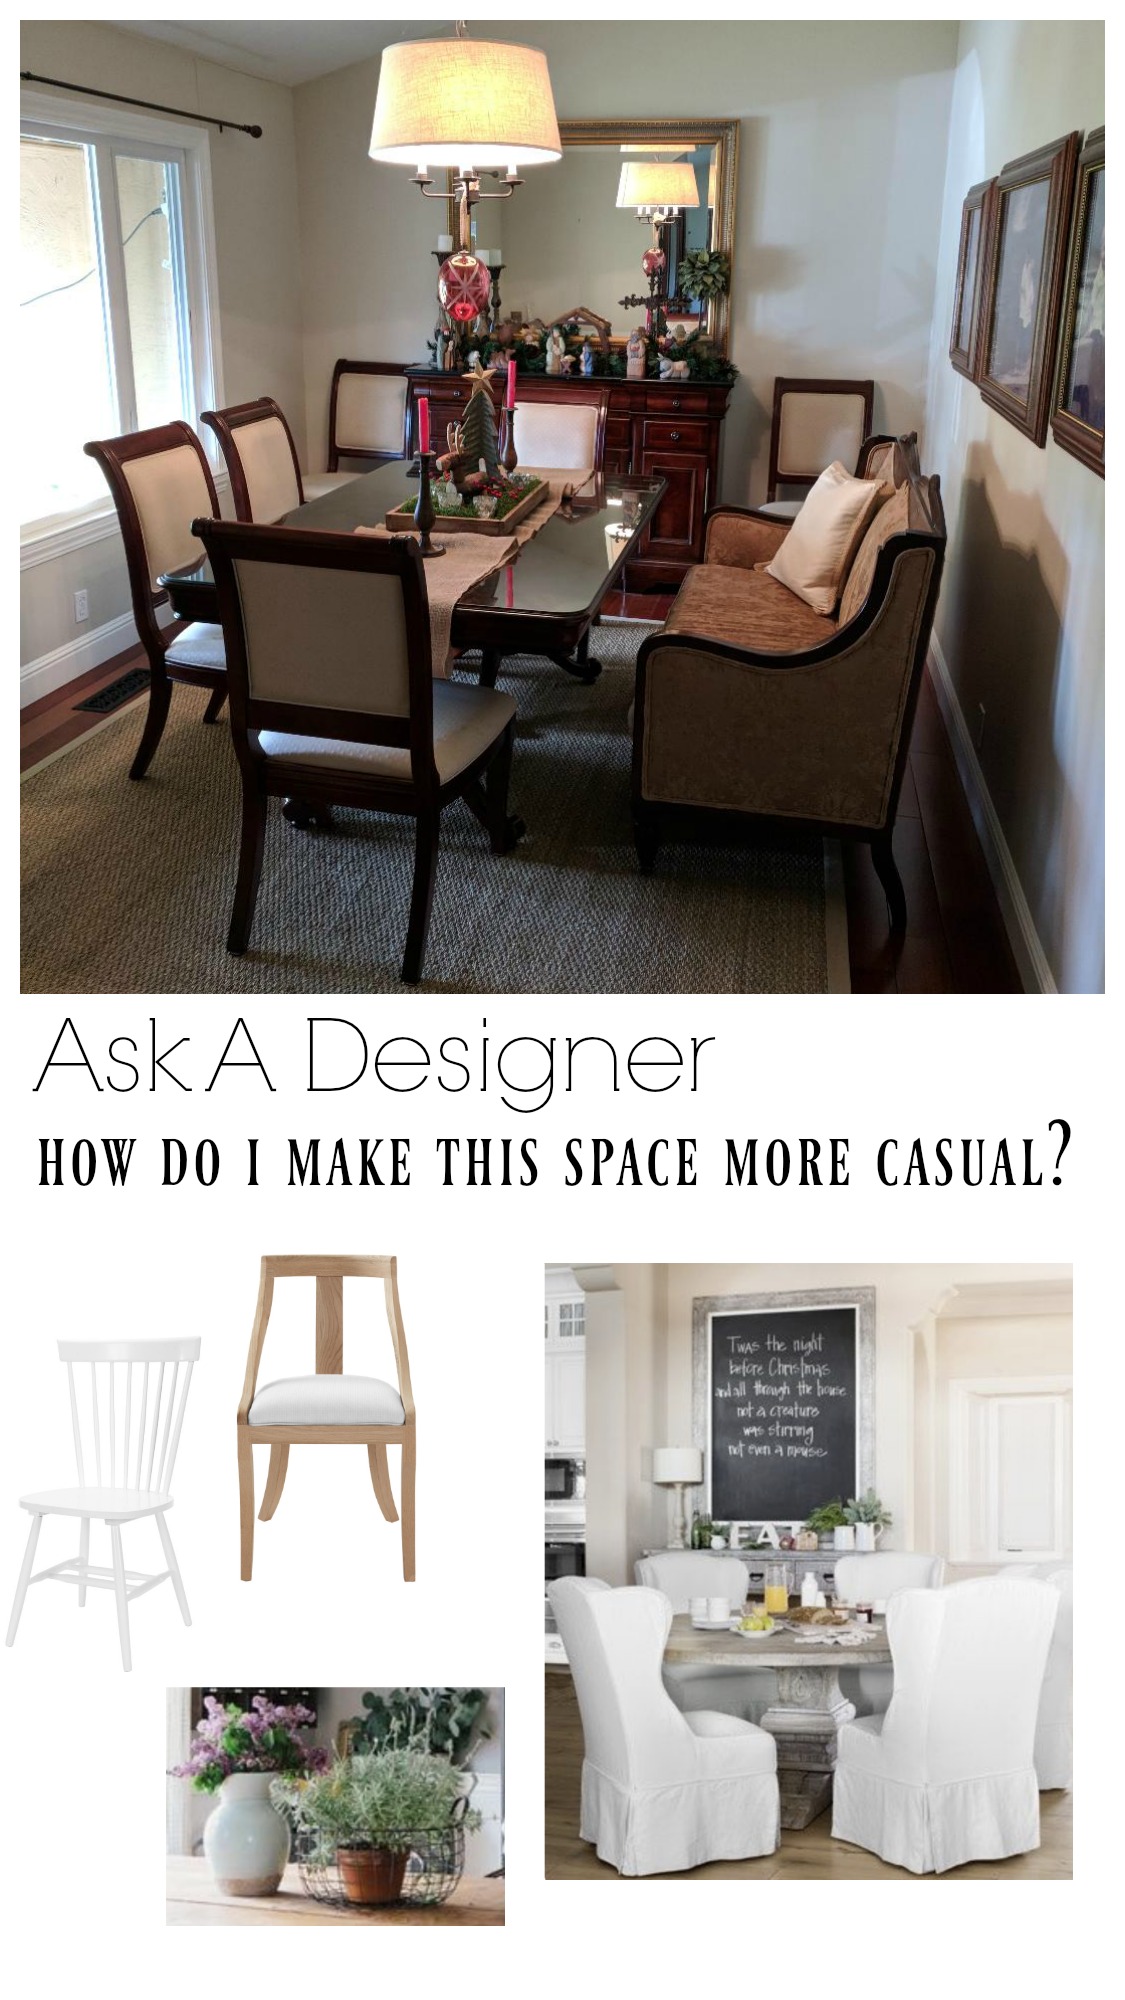 Ask a Designer Series- How to Lighten up a Dining Room